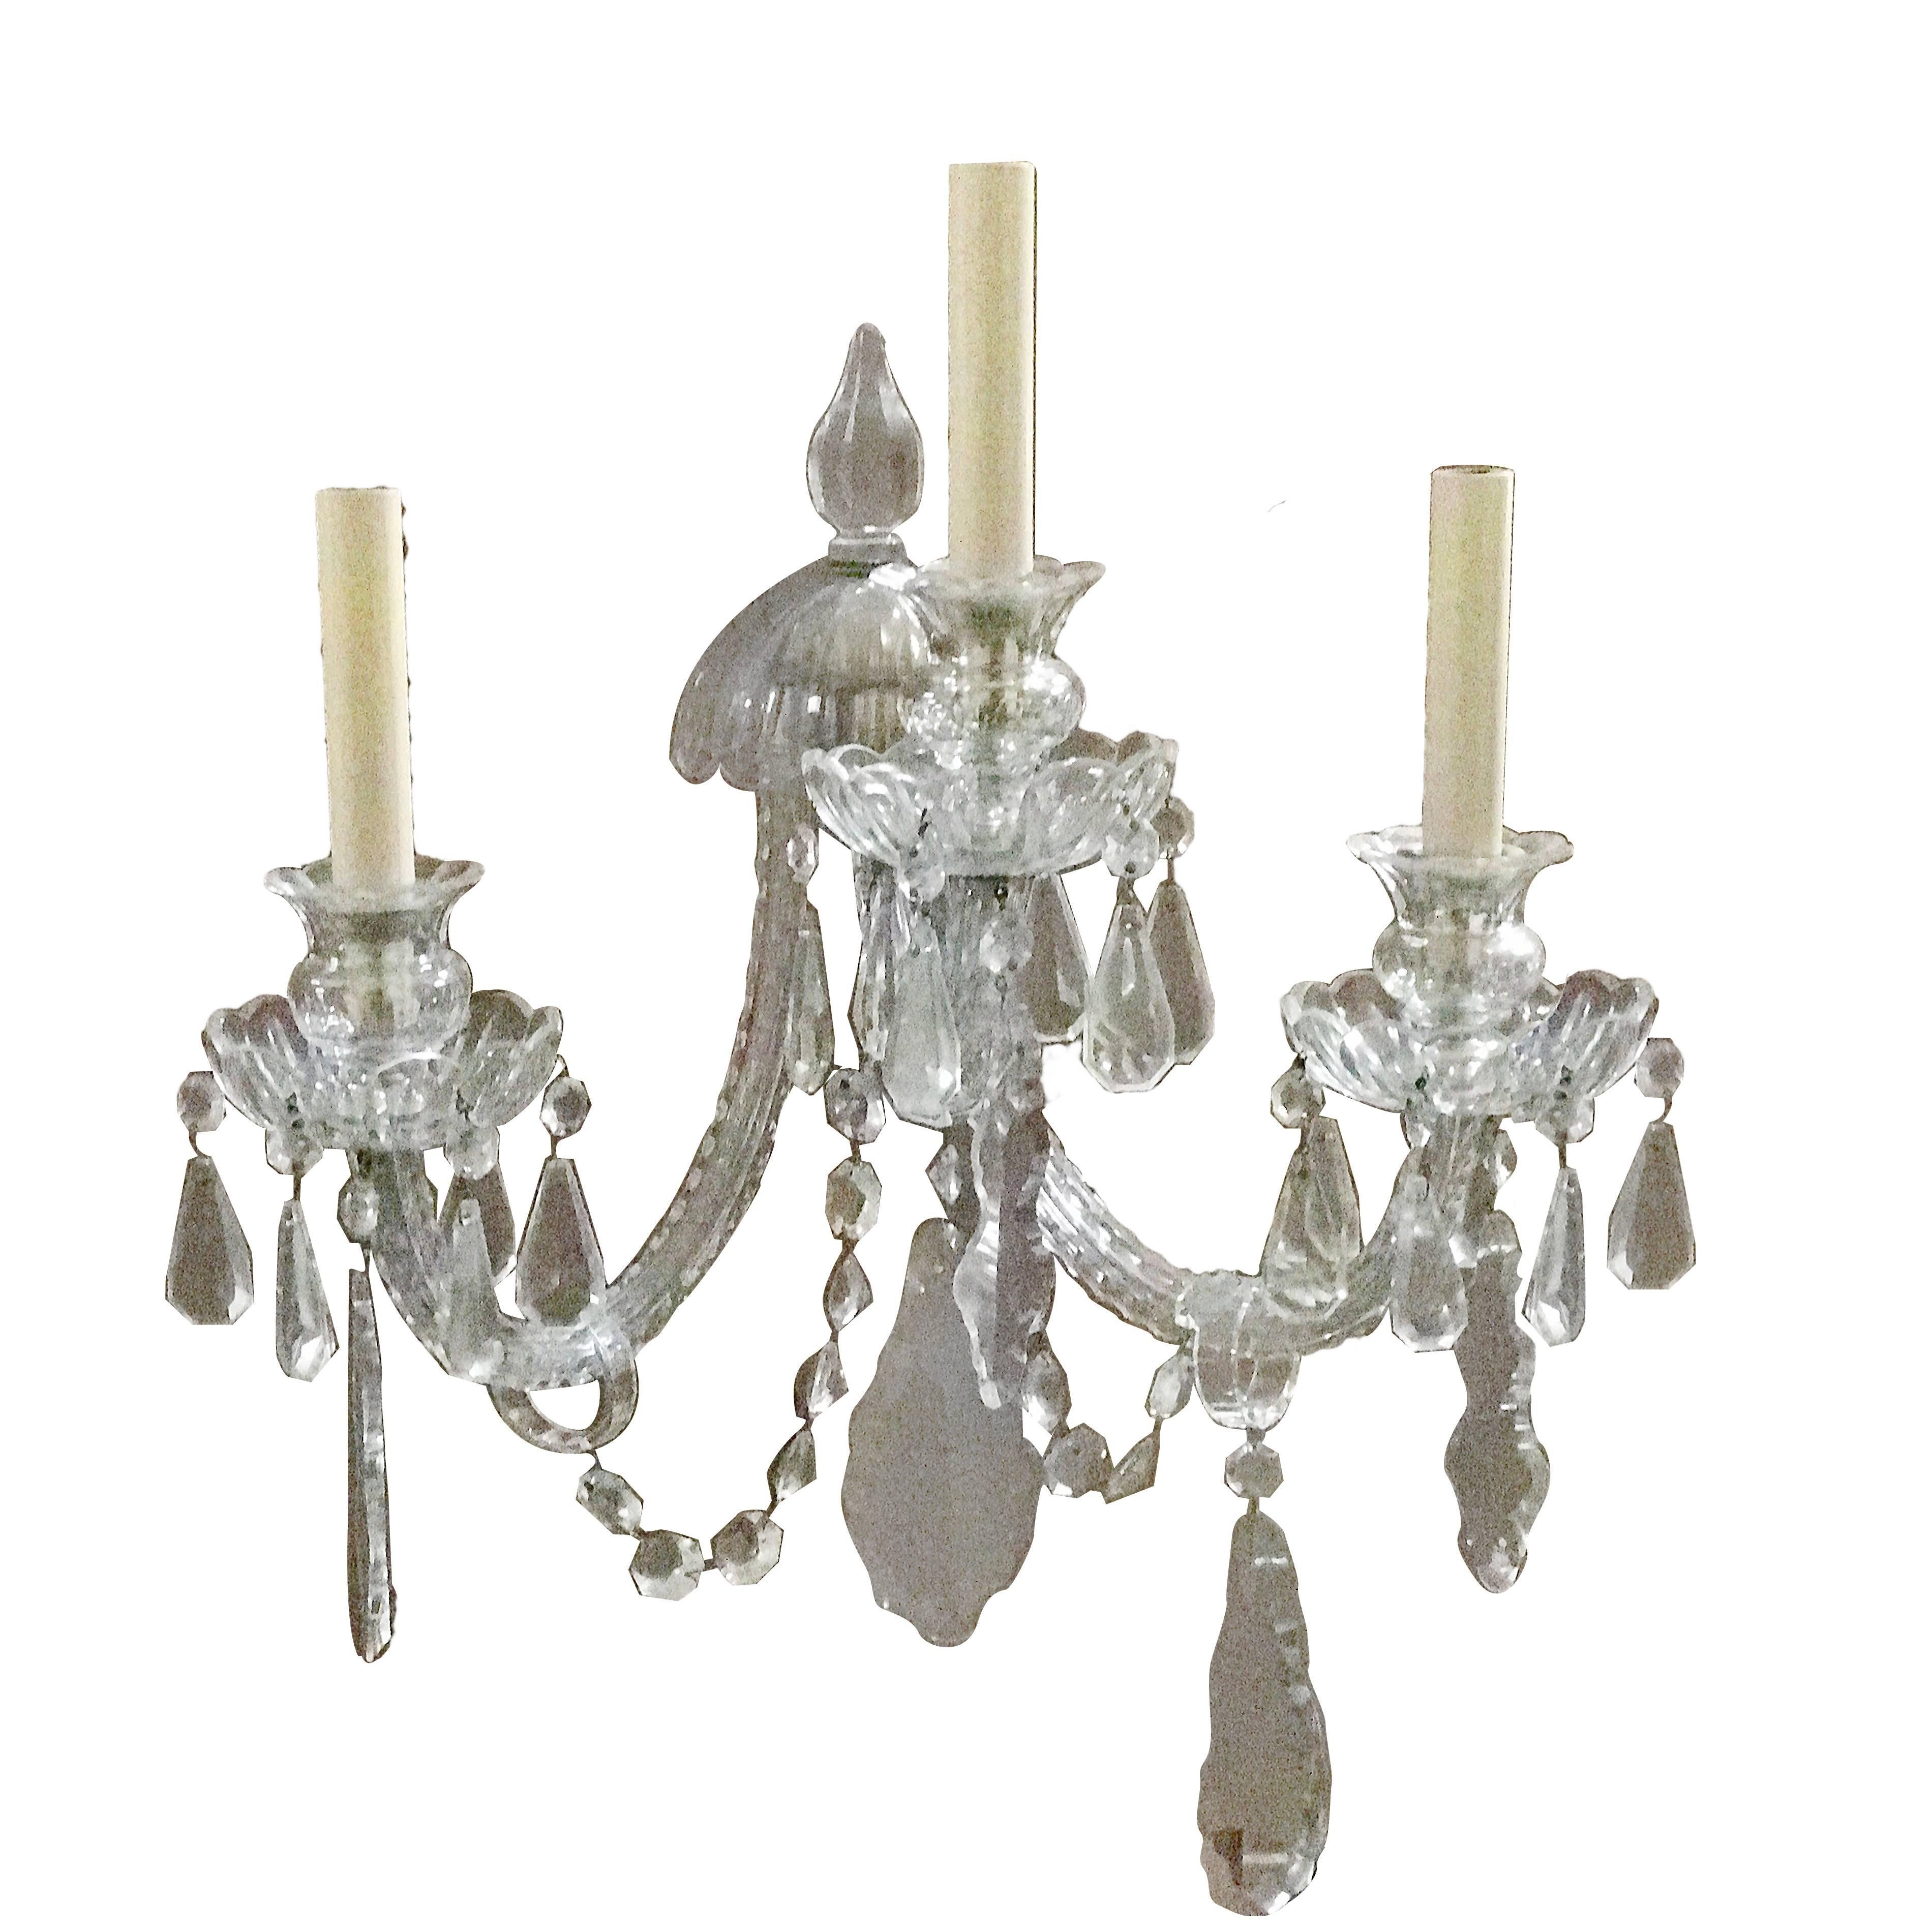 Pair of three-light cut crystal sconces with pendants.